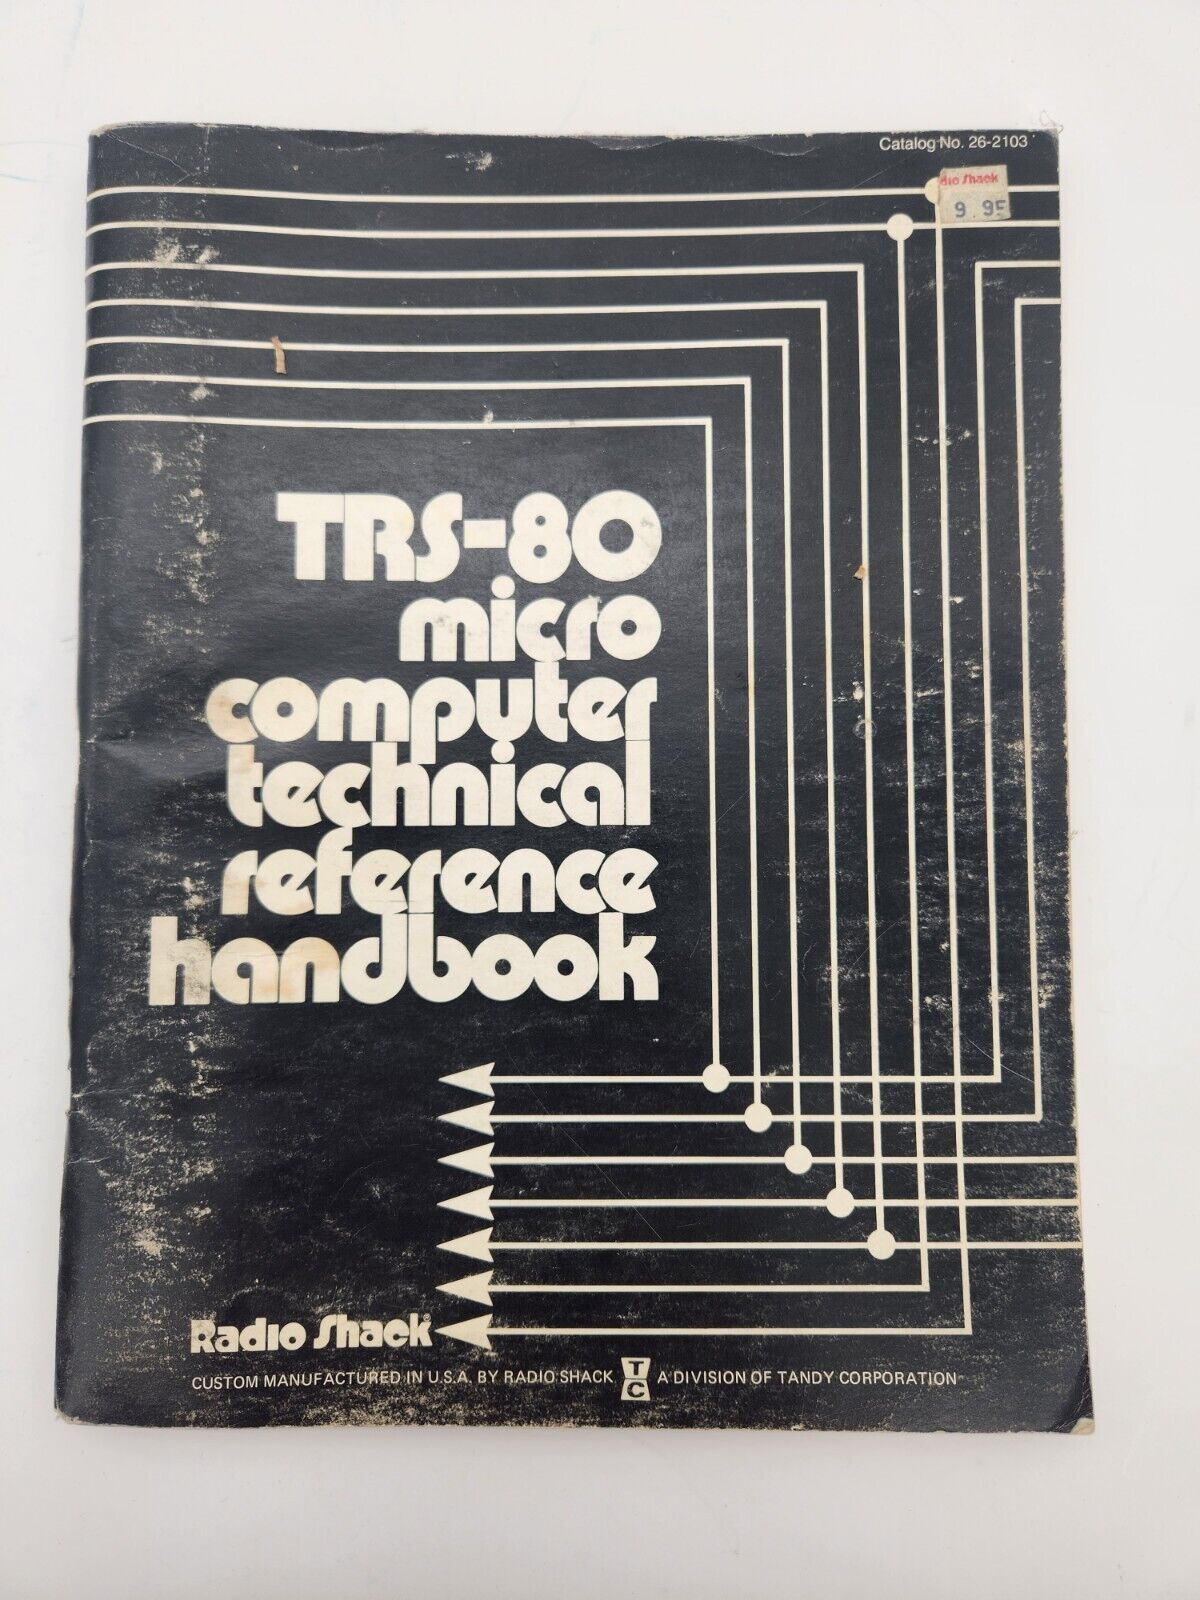 TRS-80 Micro Computer Technical Reference Handbook 1st/1st Radio Shack, 26-2103